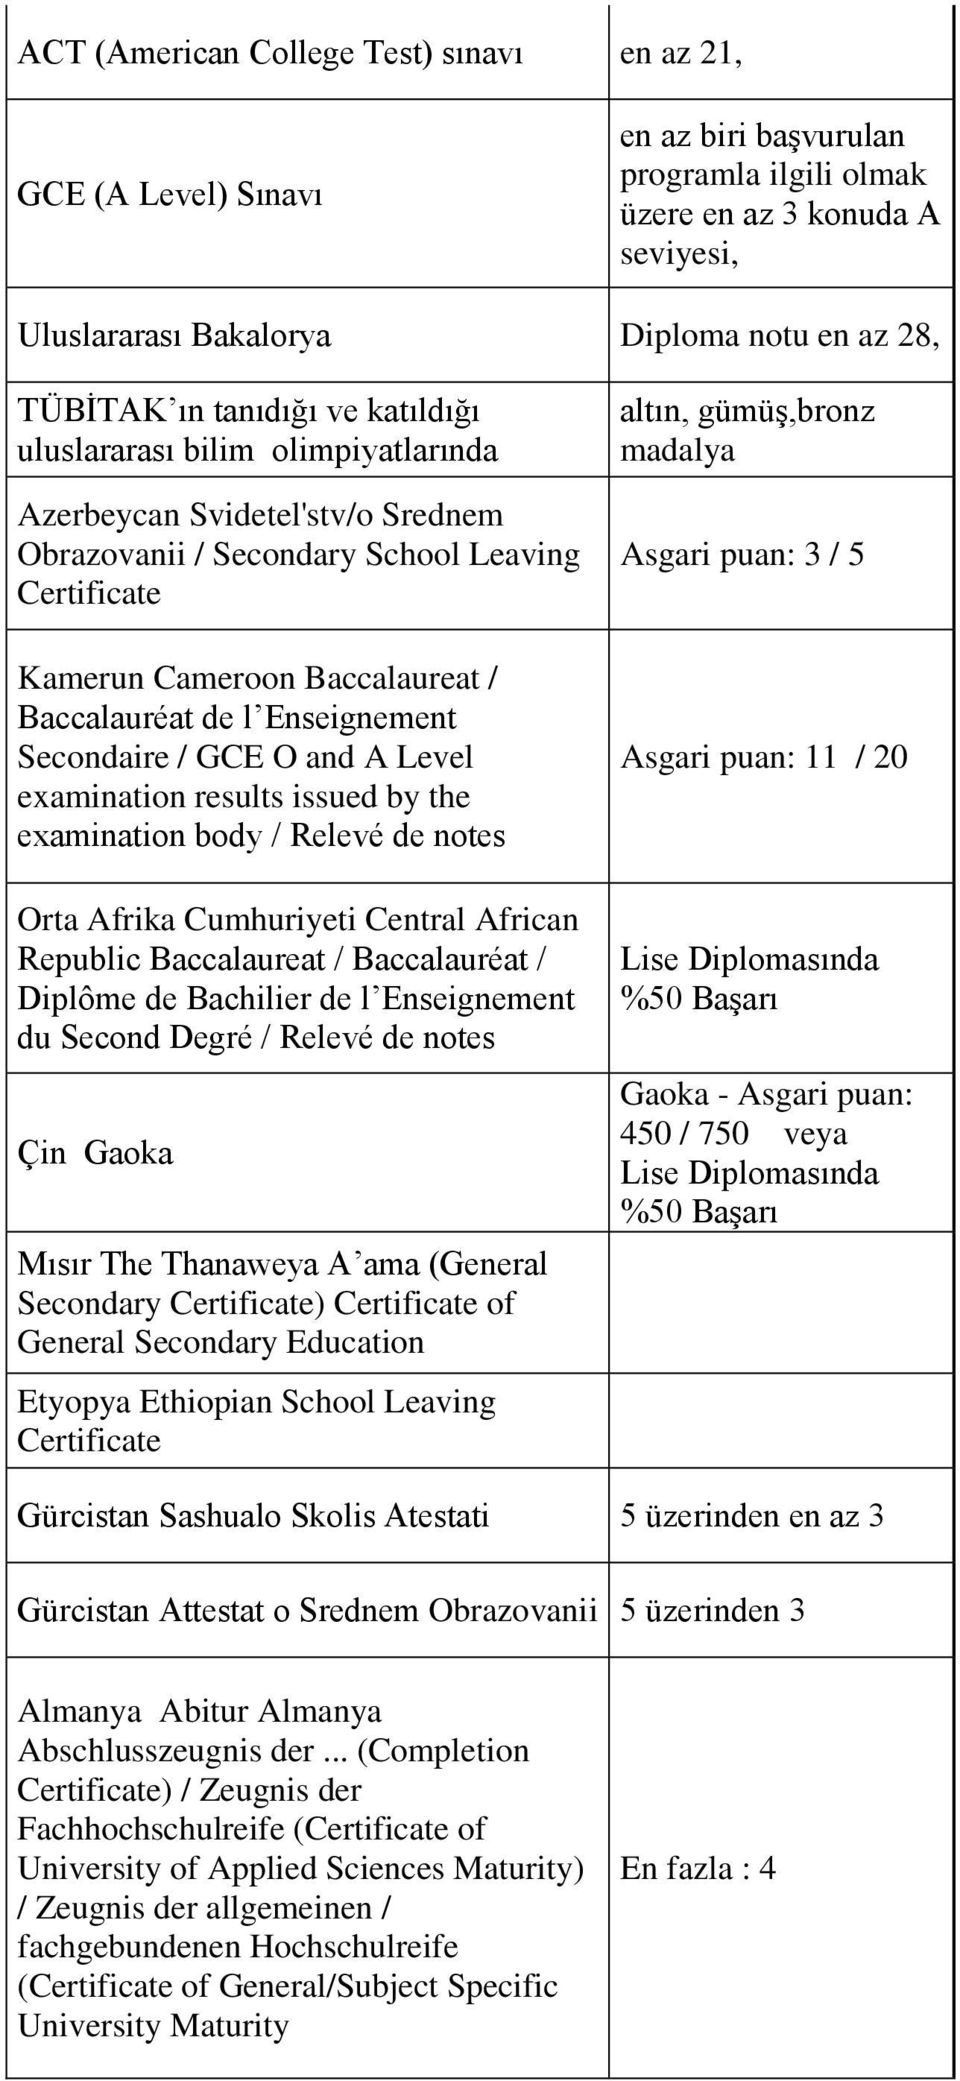 Enseignement Secondaire / GCE O and A Level examination results issued by the examination body / Relevé de notes Orta Afrika Cumhuriyeti Central African Republic Baccalaureat / Baccalauréat / Diplôme